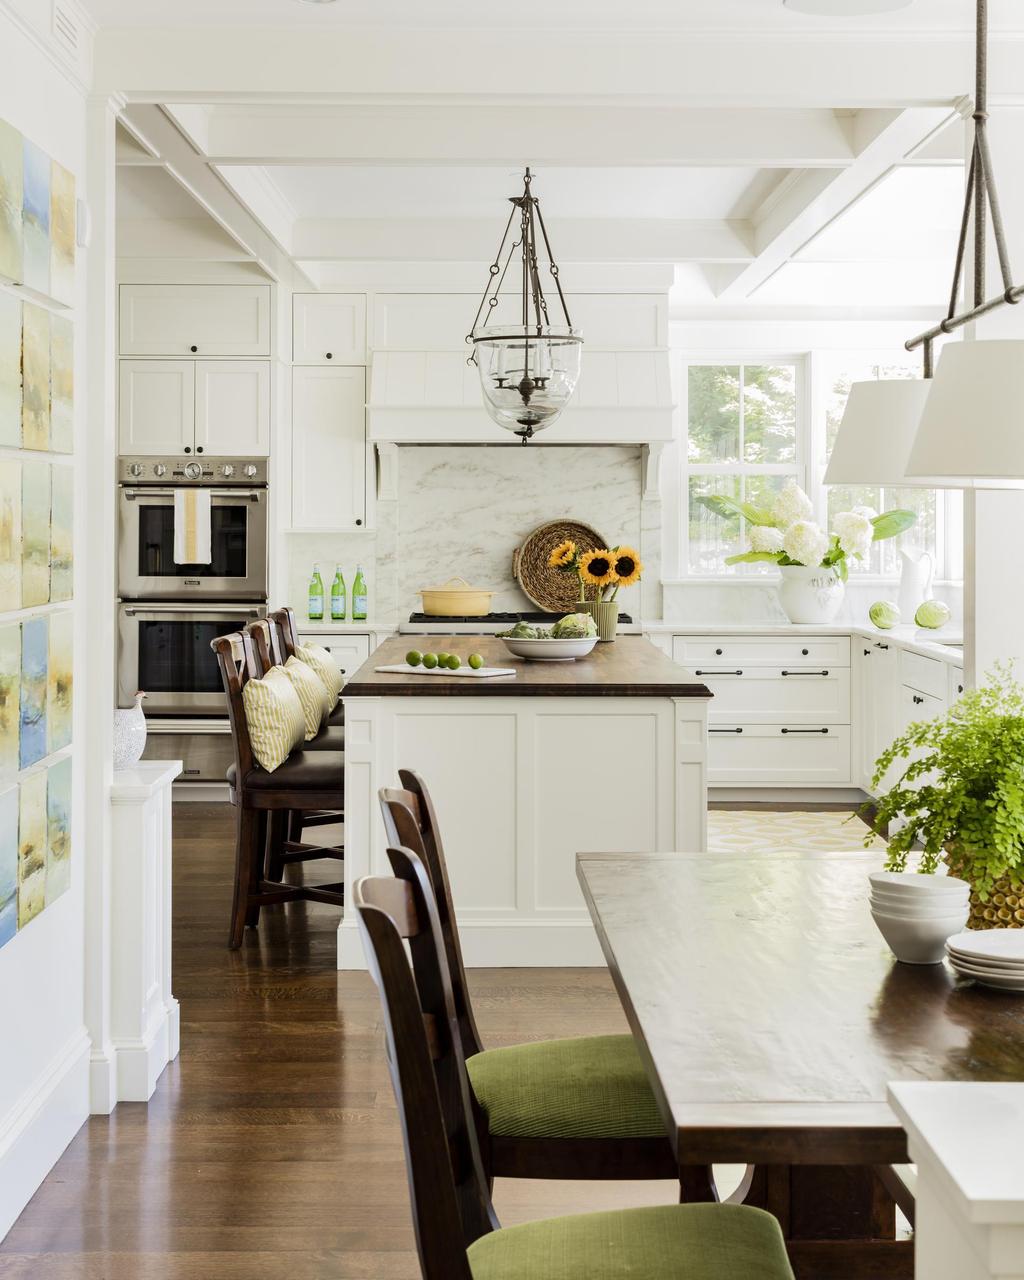 The kitchen s white cabinetry and gray marble counters and backsplash keep things bright